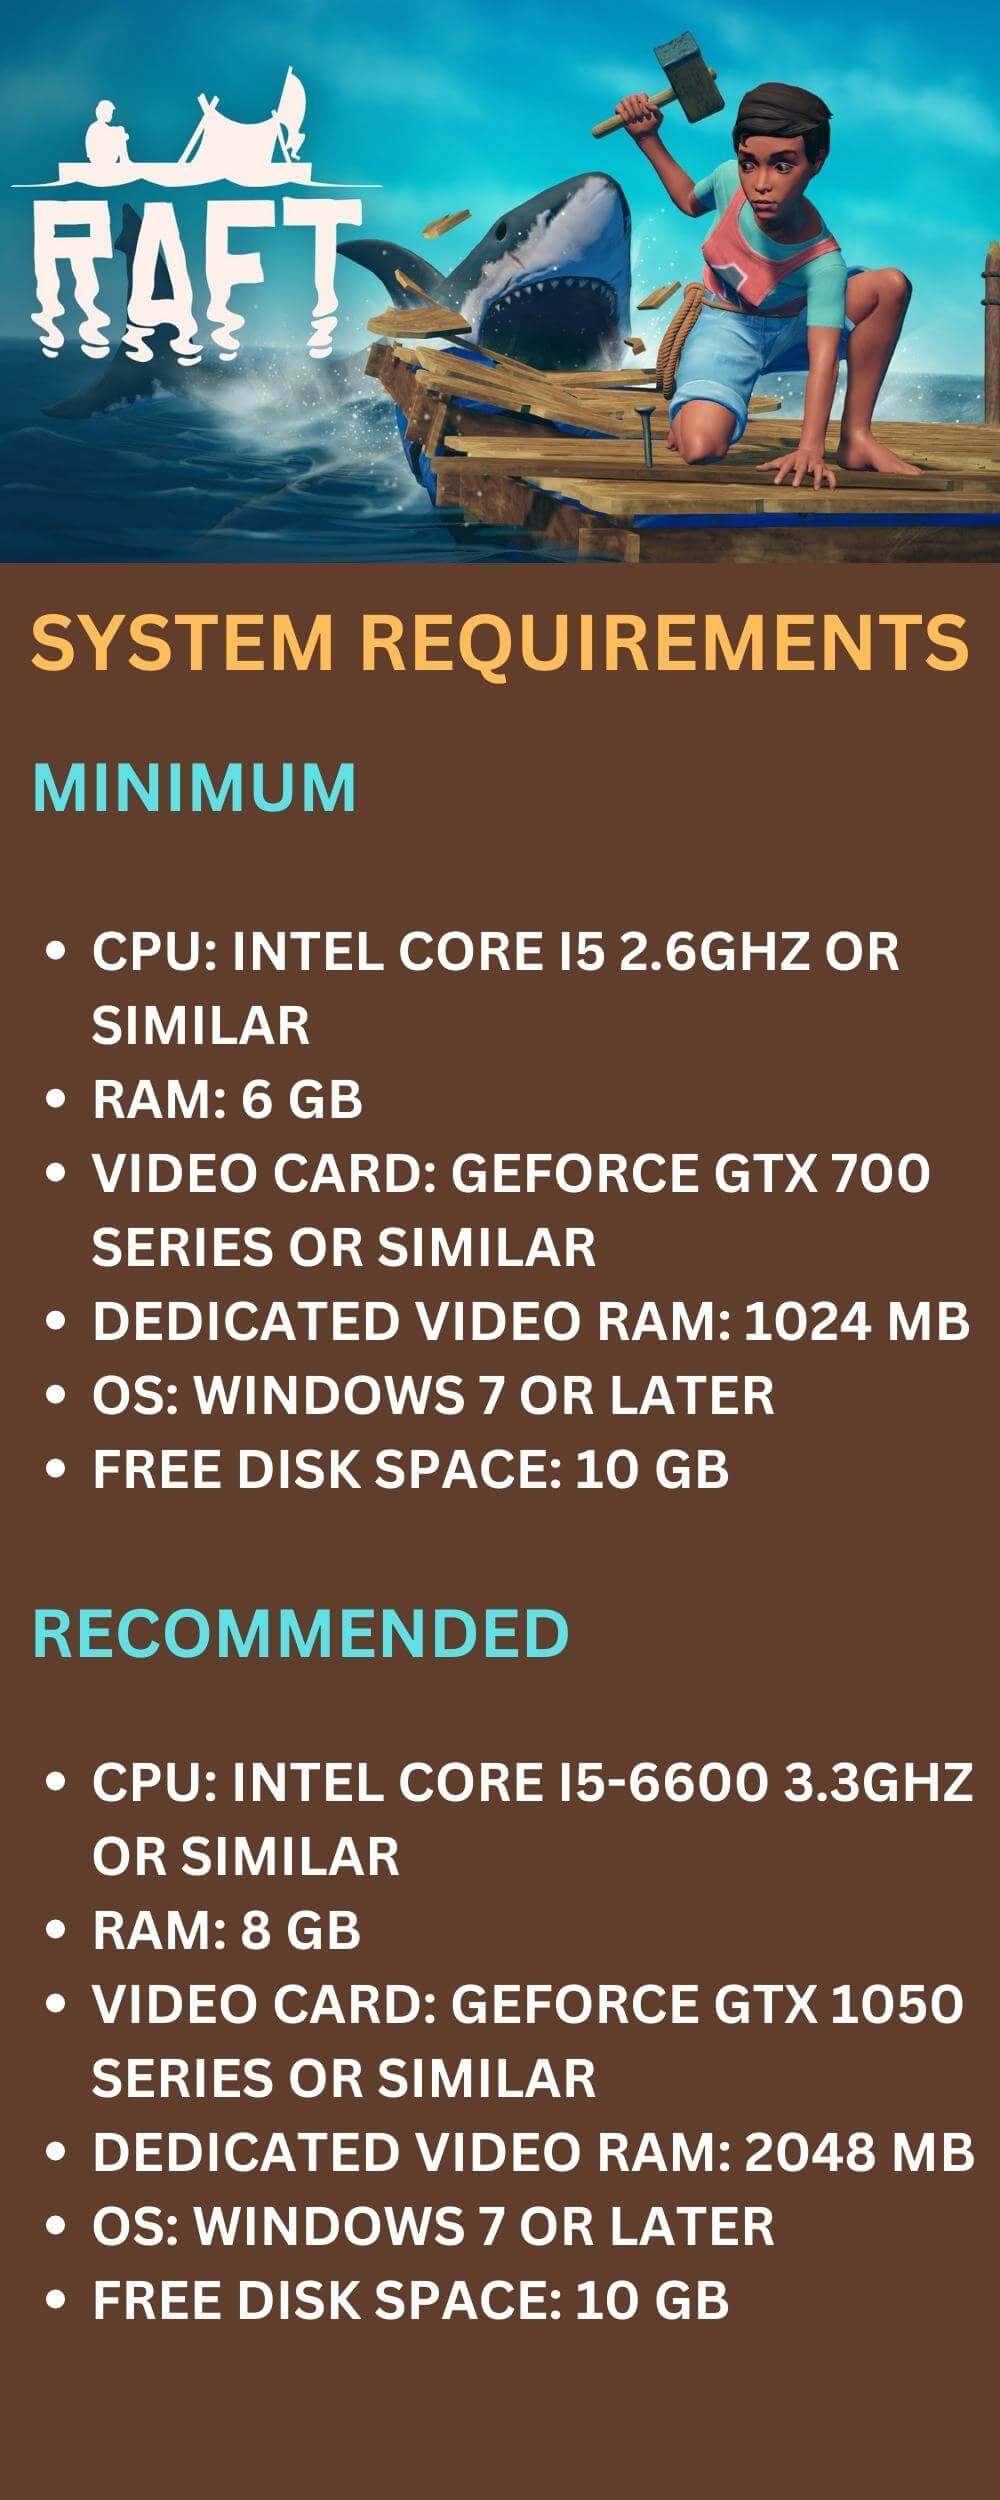 Raft System Requirements